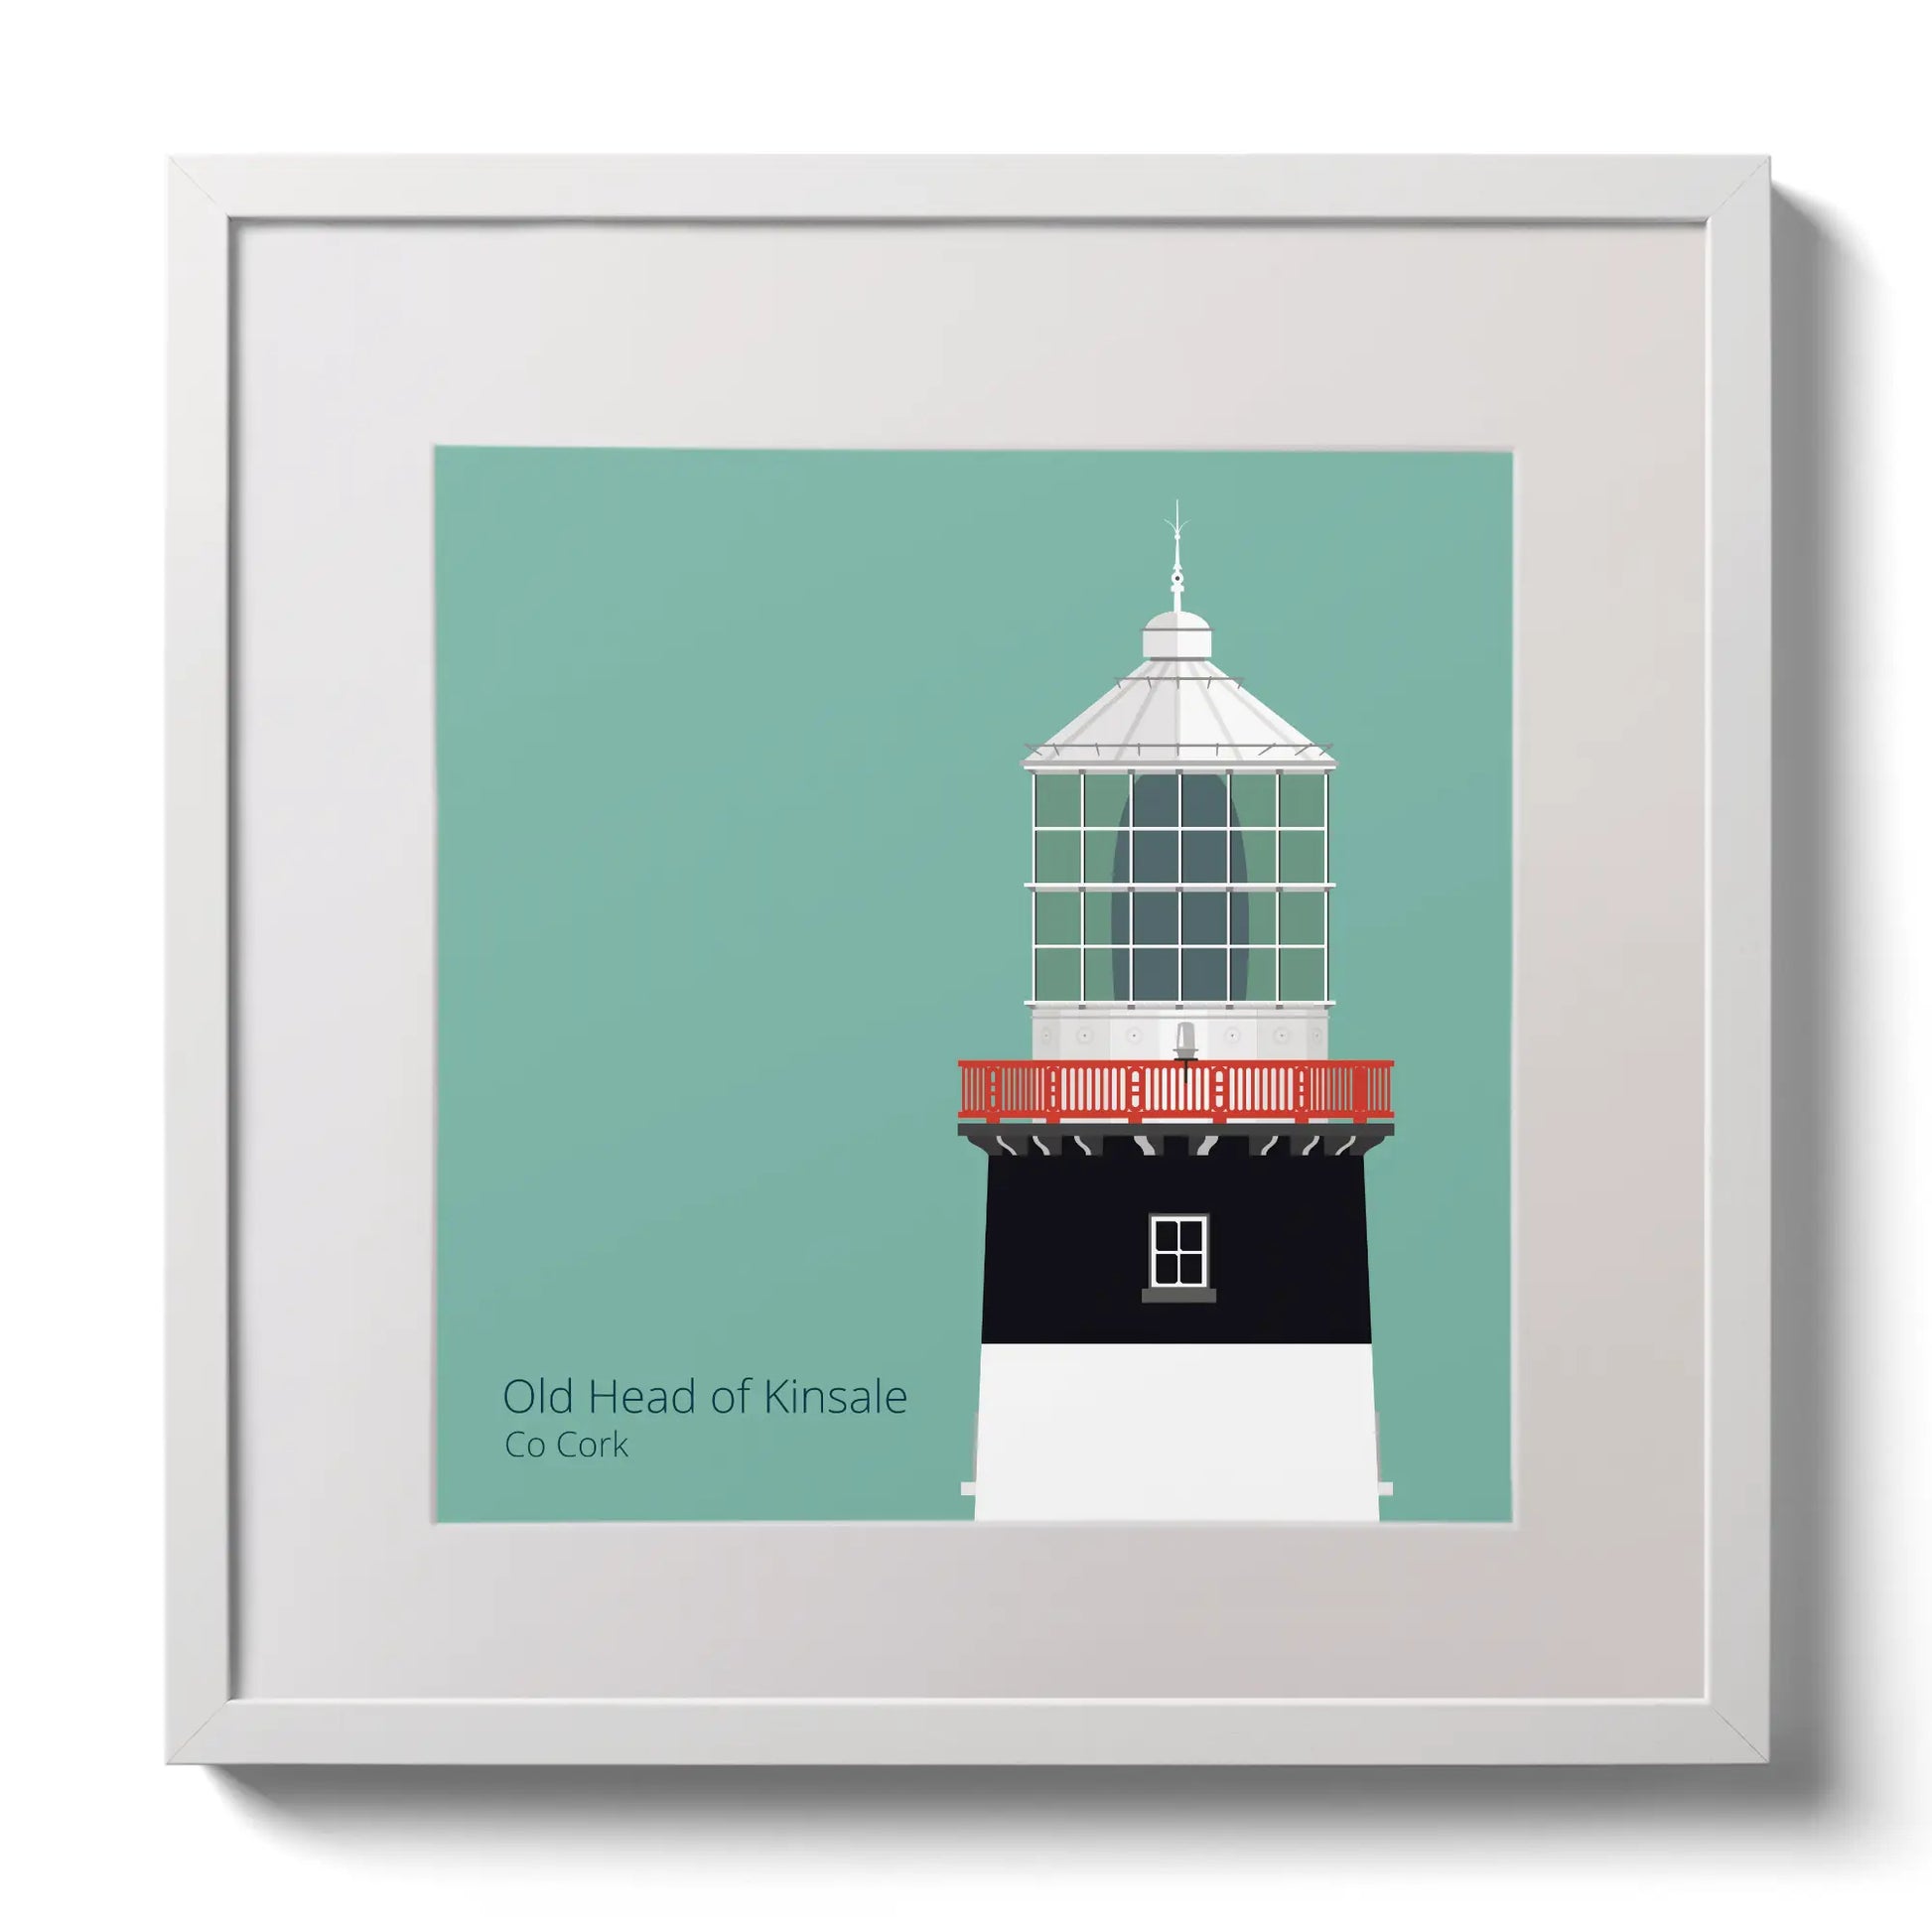 Illustration of Old Head of Kinsale lighthouse on an ocean green background,  in a white square frame measuring 30x30cm.